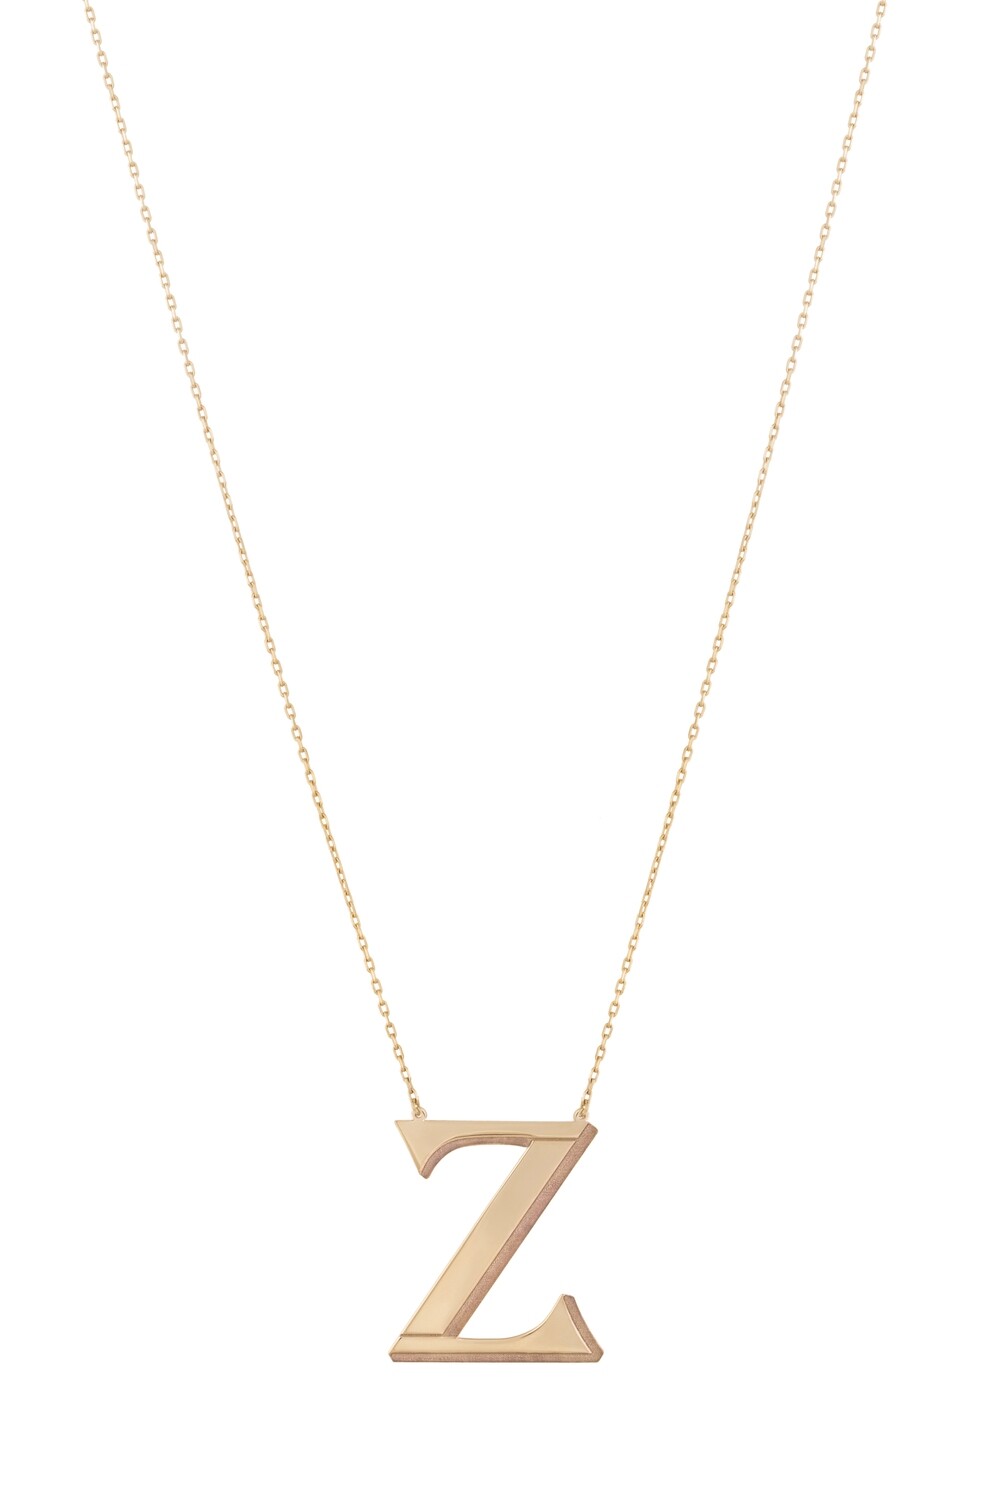 Initials Gold Necklace Letter Z